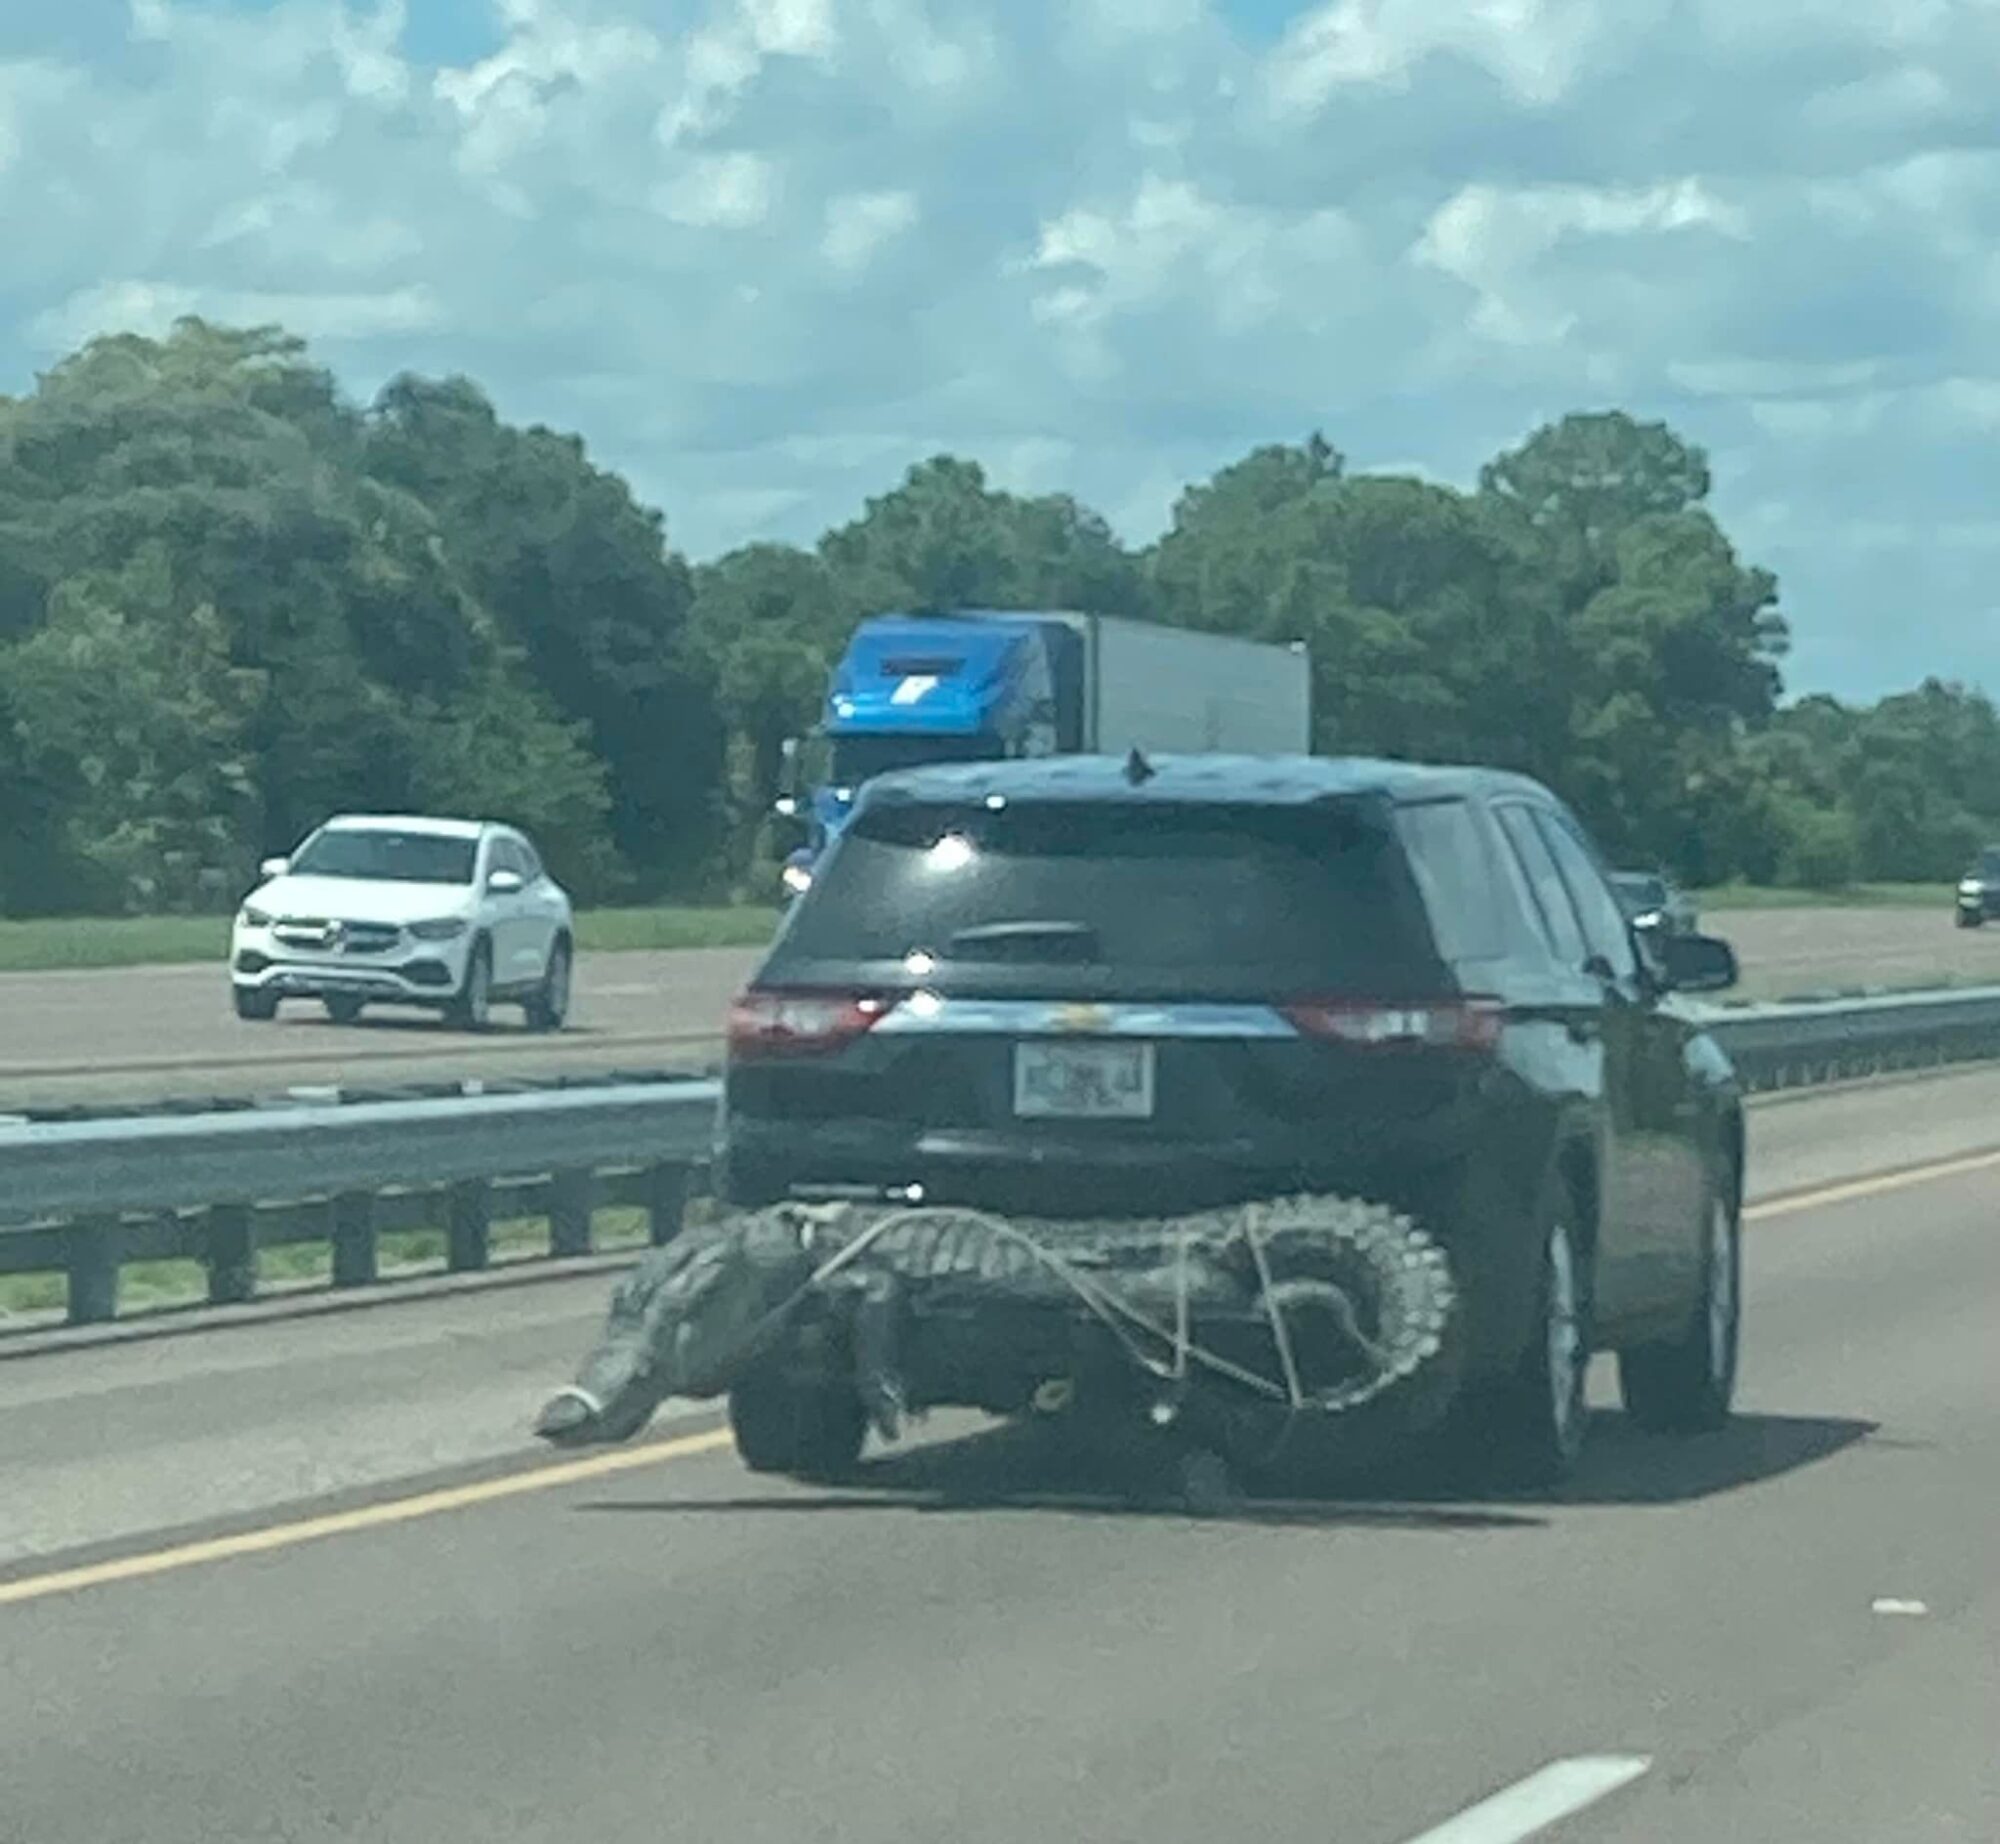 An alligator was pictured strapped to the back of a Chevy Traverse on a Florida interstate highway.